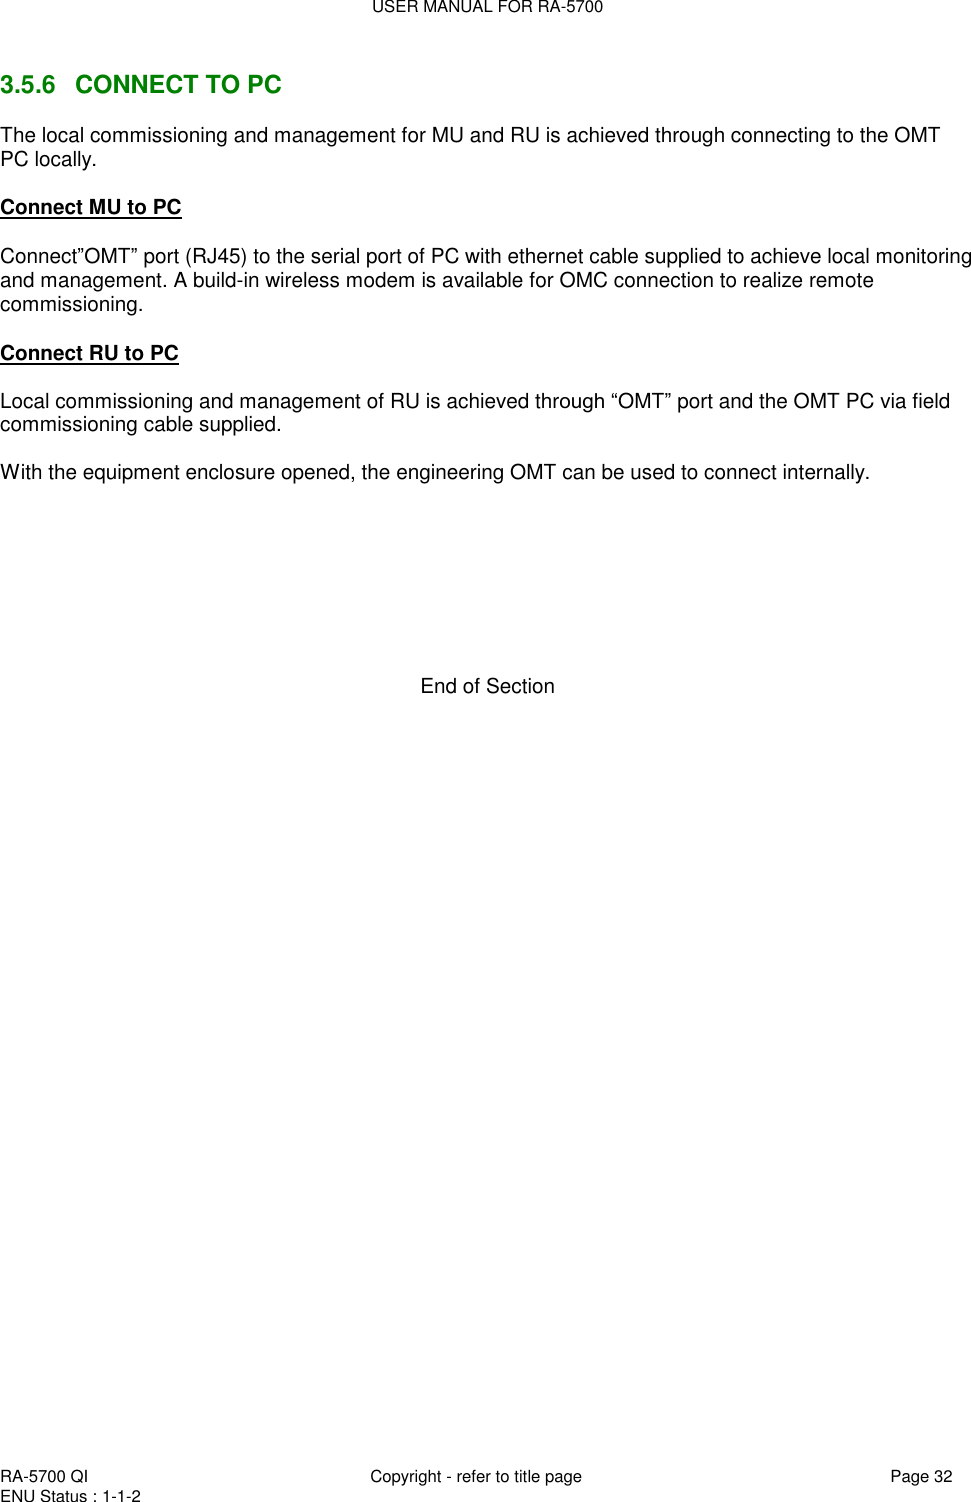 USER MANUAL FOR RA-5700  RA-5700 QI  Copyright - refer to title page Page 32 ENU Status : 1-1-2    3.5.6  CONNECT TO PC The local commissioning and management for MU and RU is achieved through connecting to the OMT PC locally.  Connect MU to PC  Connect”OMT” port (RJ45) to the serial port of PC with ethernet cable supplied to achieve local monitoring and management. A build-in wireless modem is available for OMC connection to realize remote commissioning.   Connect RU to PC  Local commissioning and management of RU is achieved through “OMT” port and the OMT PC via field commissioning cable supplied.  With the equipment enclosure opened, the engineering OMT can be used to connect internally.          End of Section   